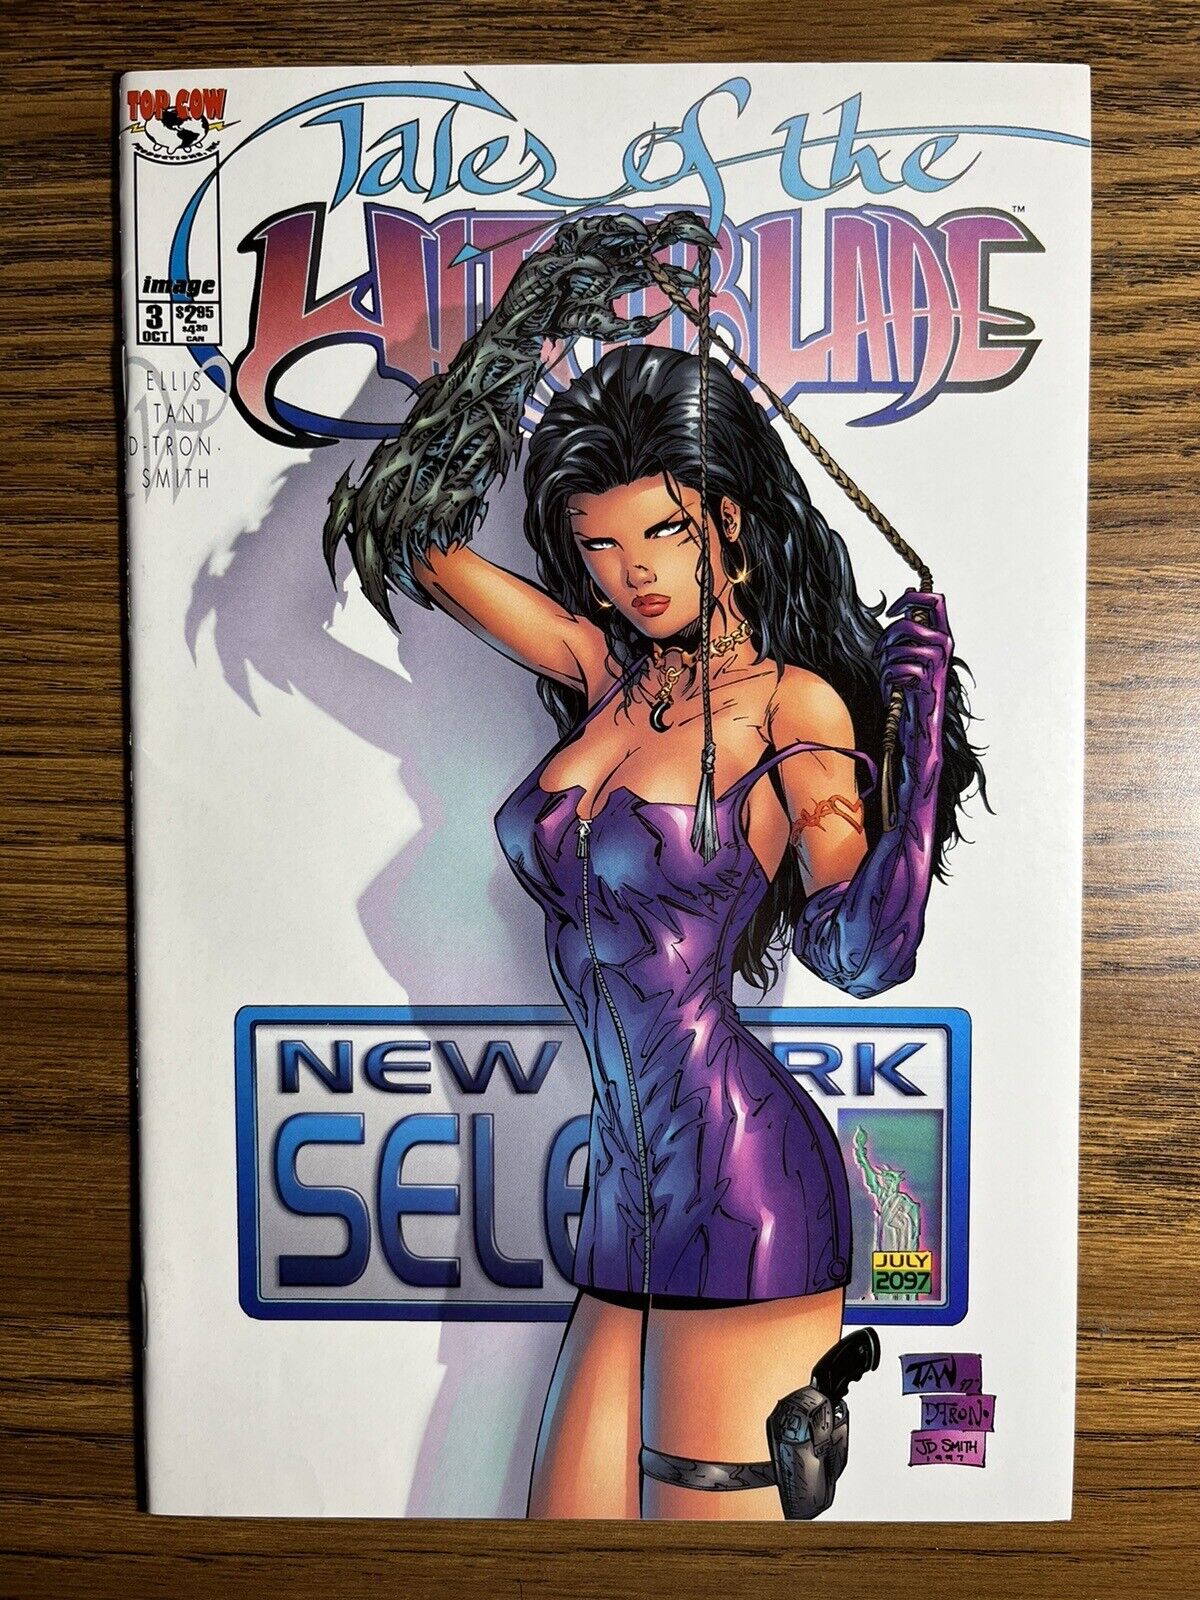 TALES OF THE WITCHBLADE 3 BILLY TAN COVER IMAGE TOP COW COMICS 1997